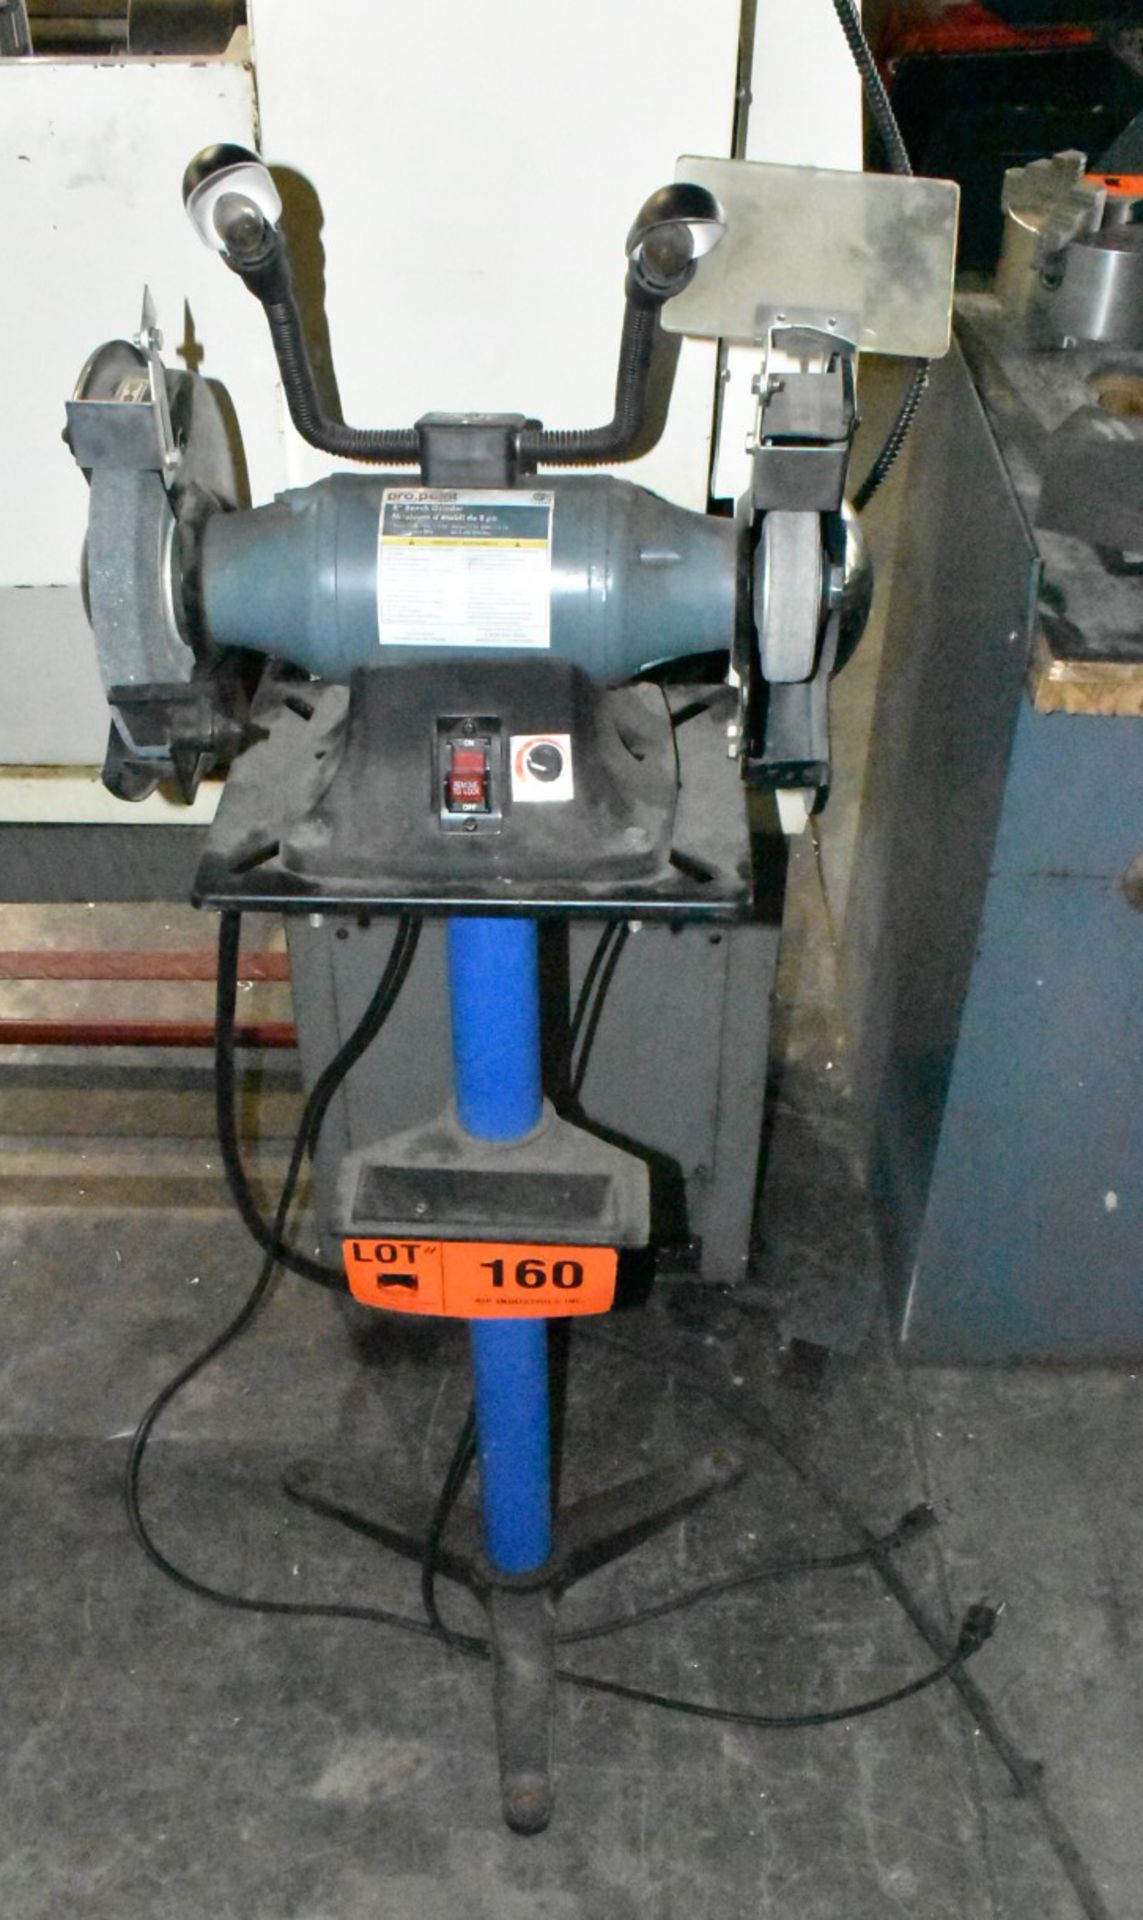 PRO POINT 8" PEDESTAL GRINDER [RIGGING FOR LOT #160 - $25 CAD PLUS APPLICABLE TAXES]